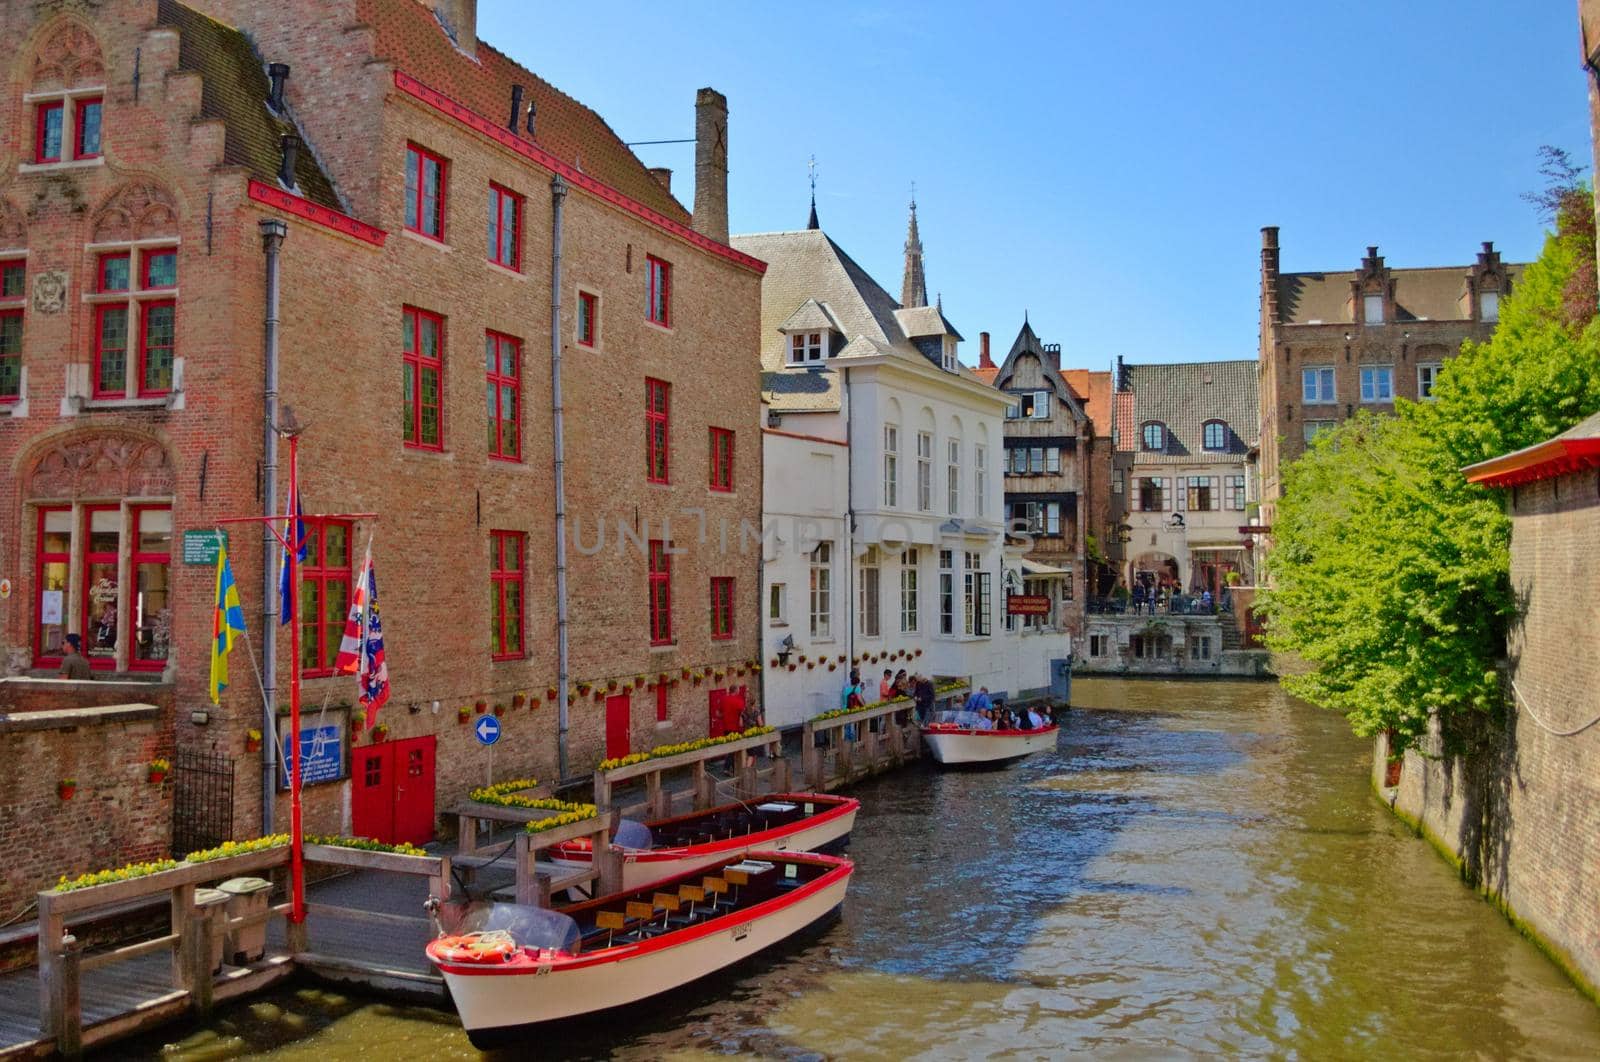 Picturesque view of the canals in Brugge, Belgium. by hernan_hyper